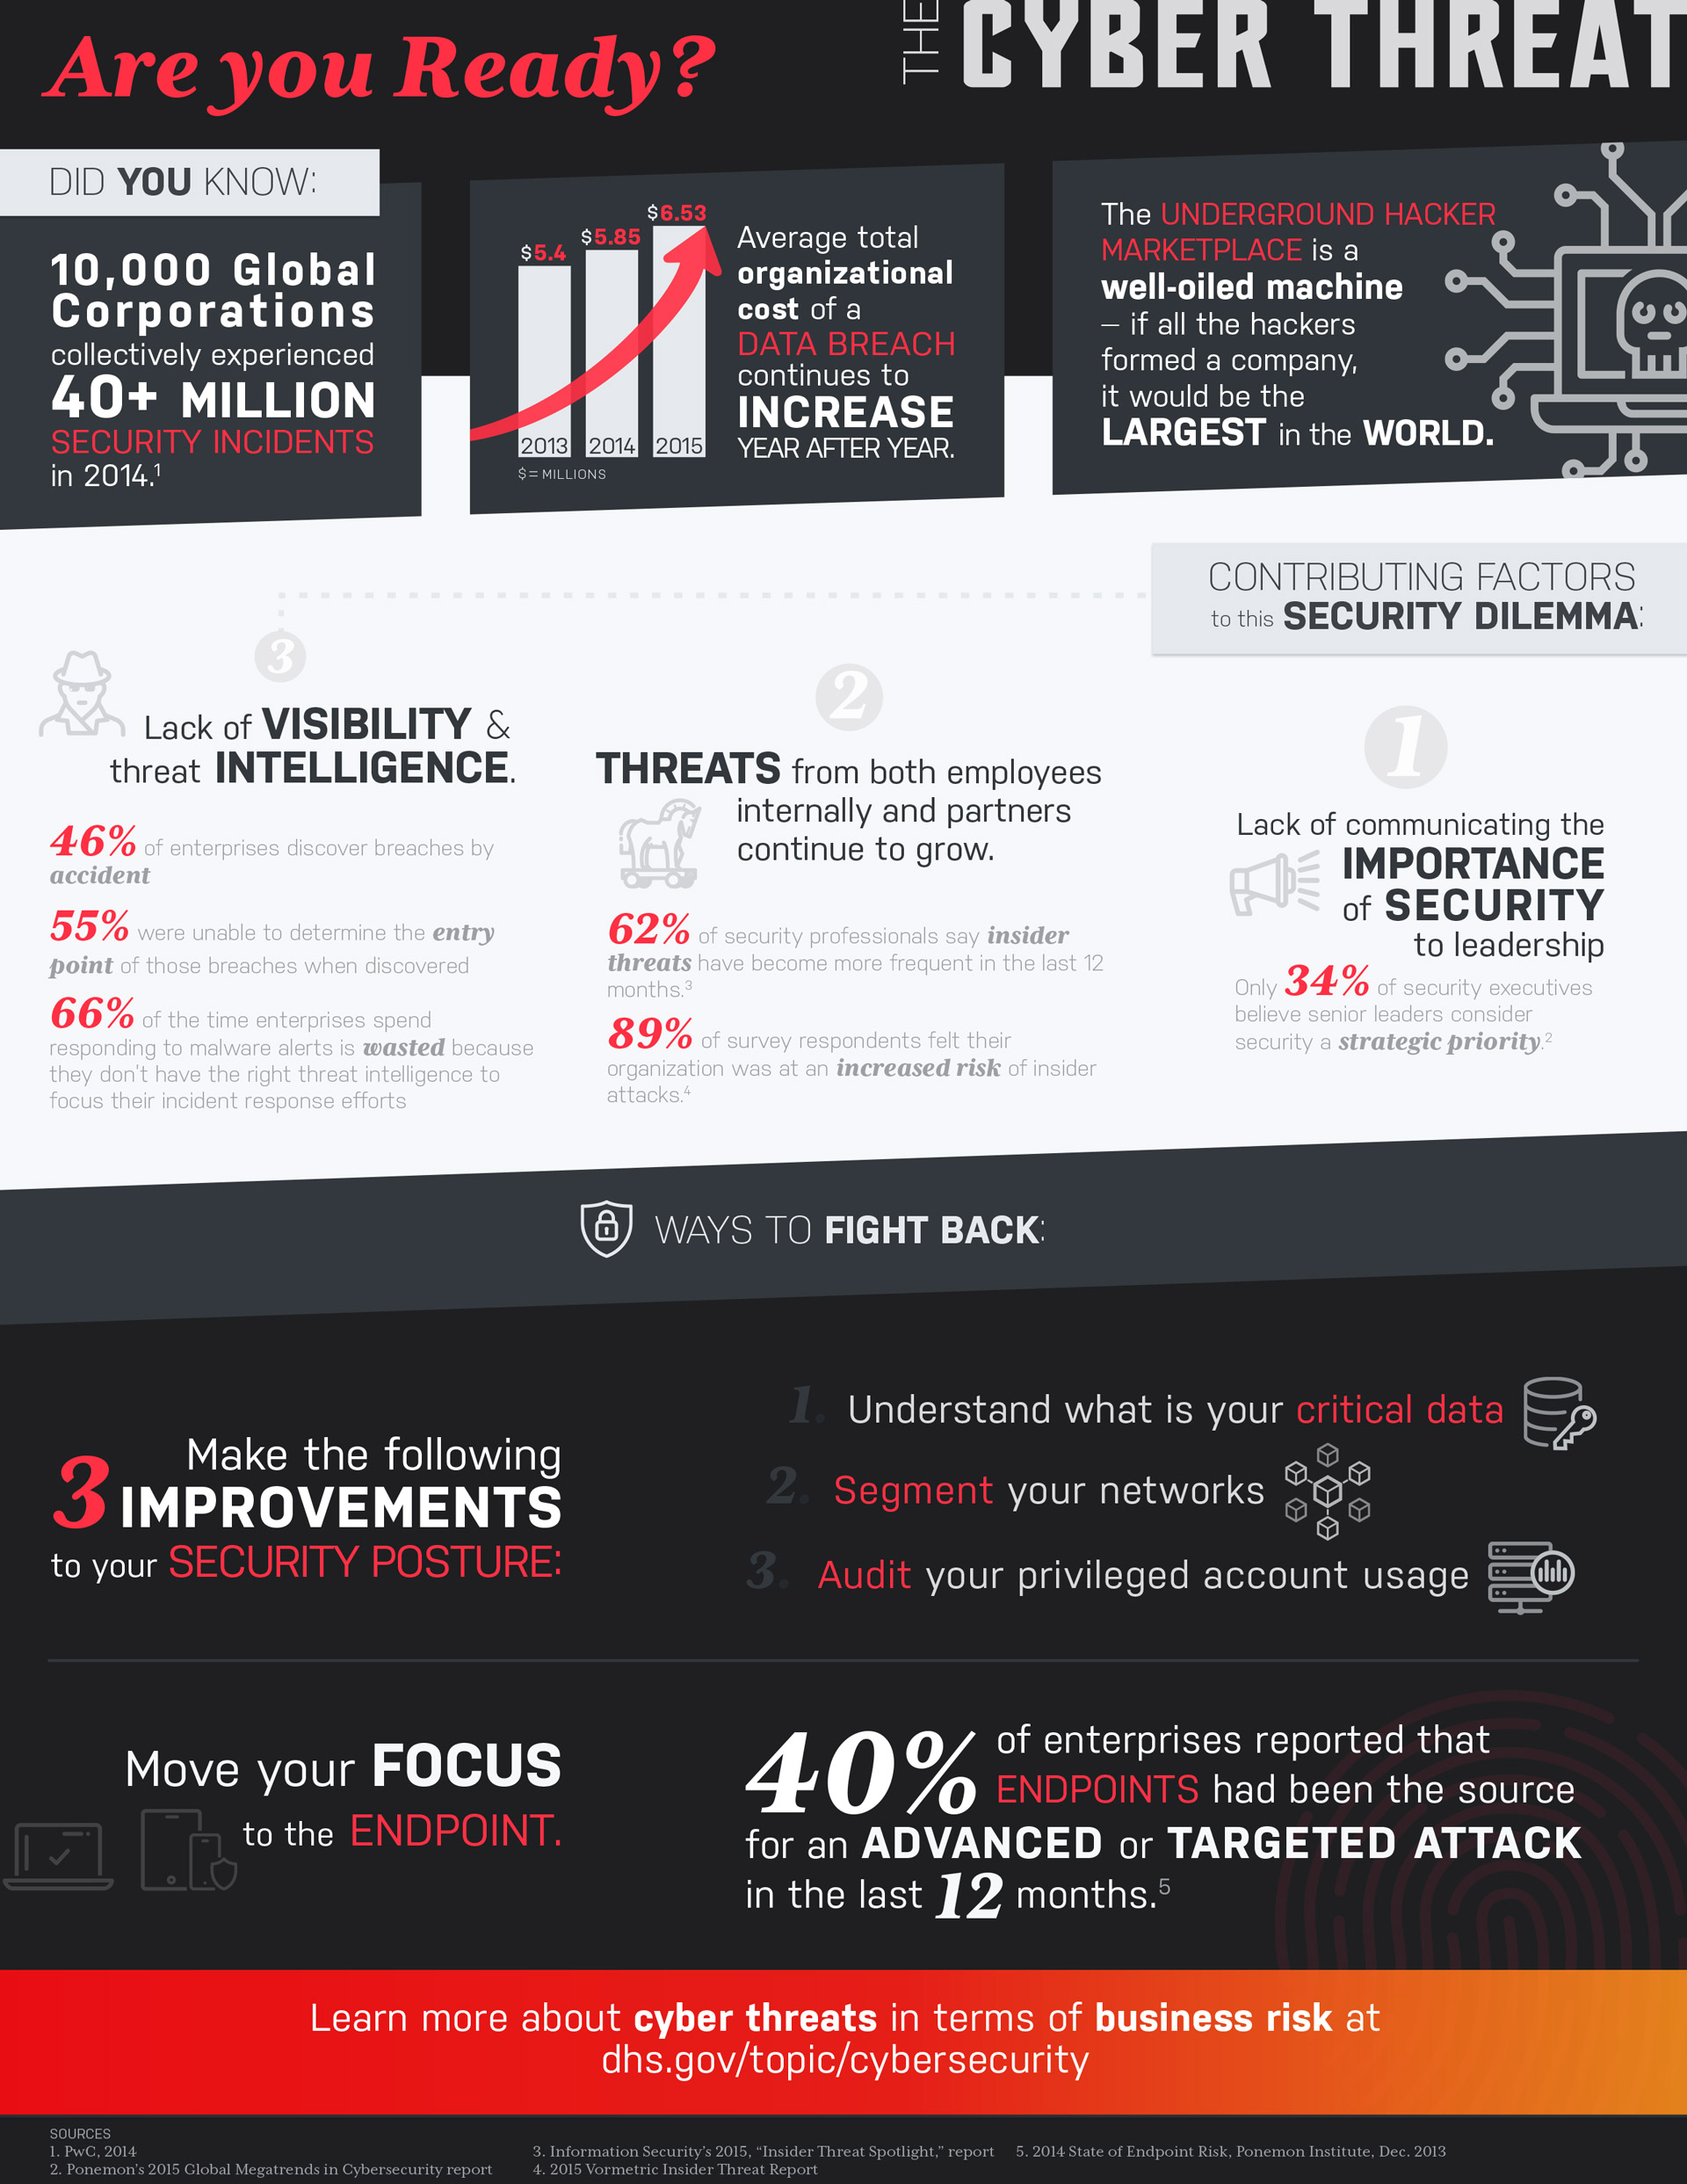 Infographic about Cyber threat causes and steps for remediation and protection